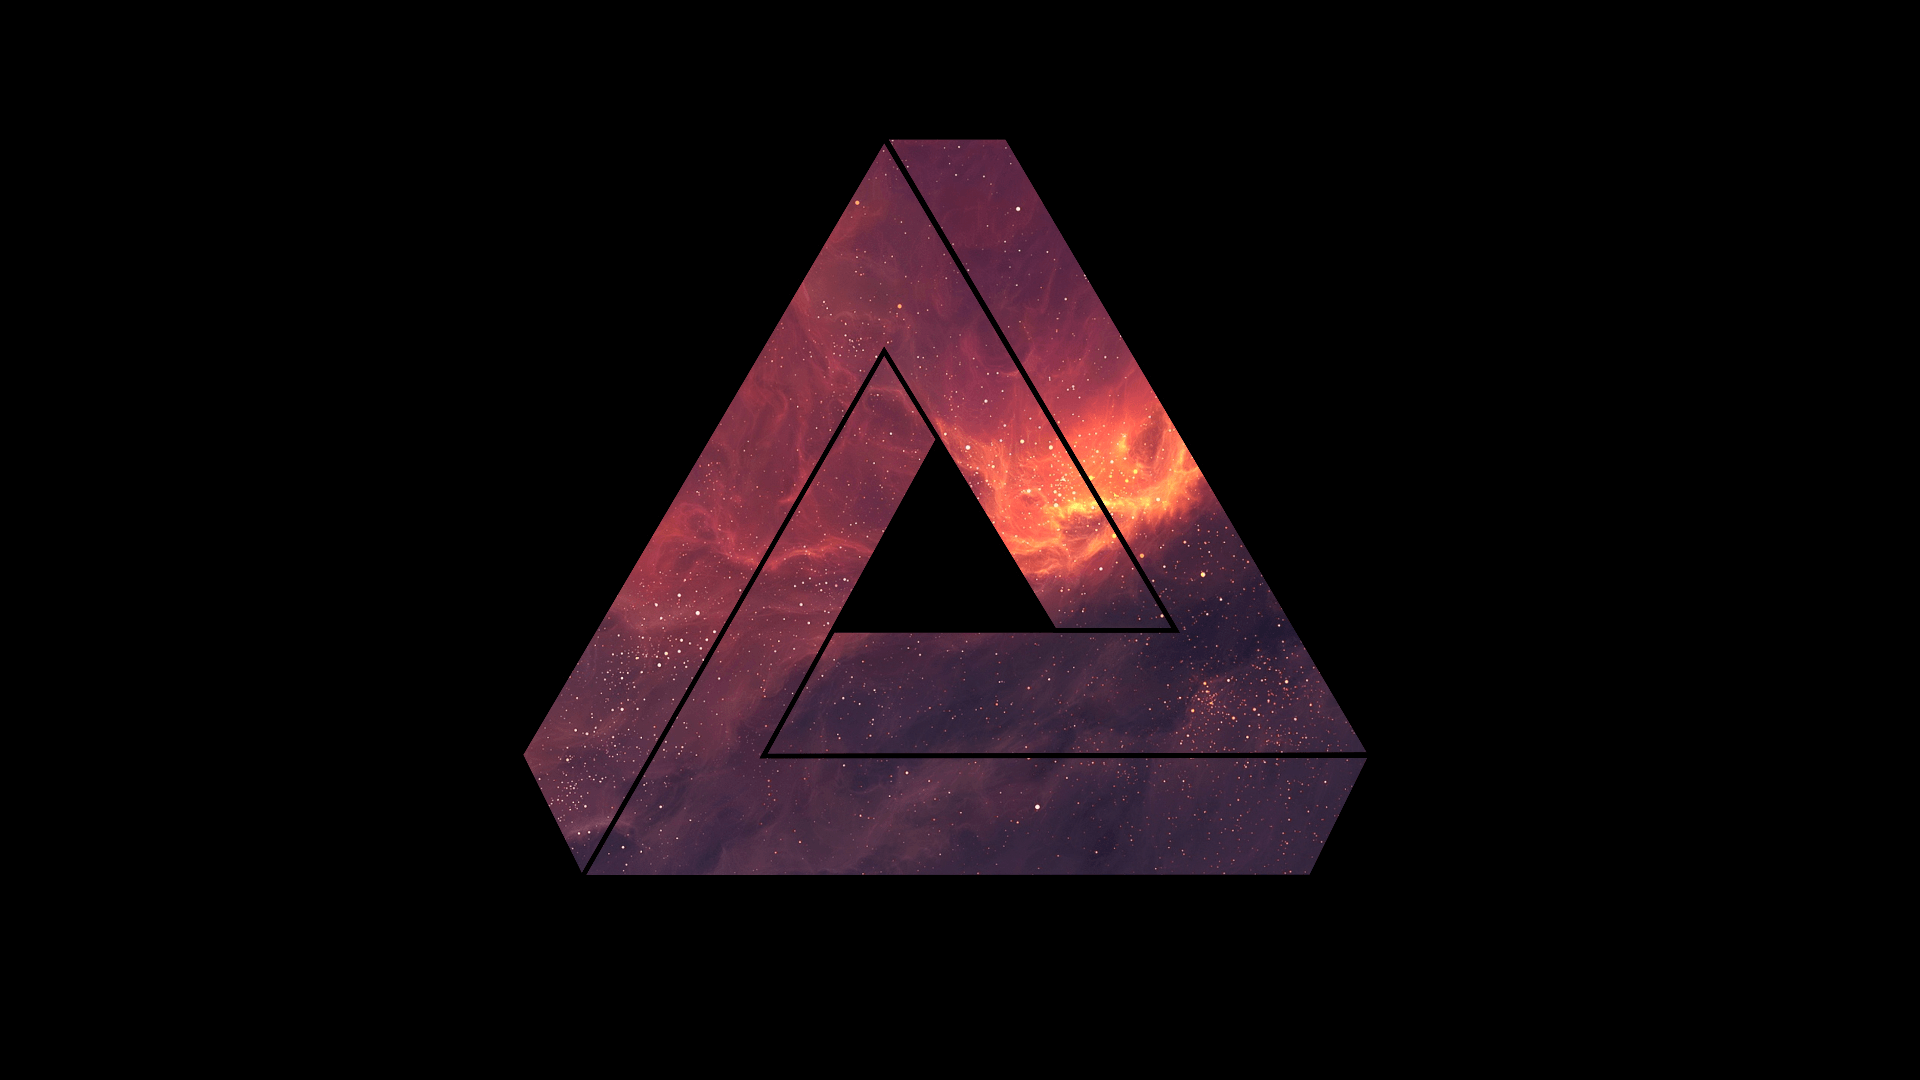 Space Triangle Wallpapers Top Free Space Triangle Backgrounds